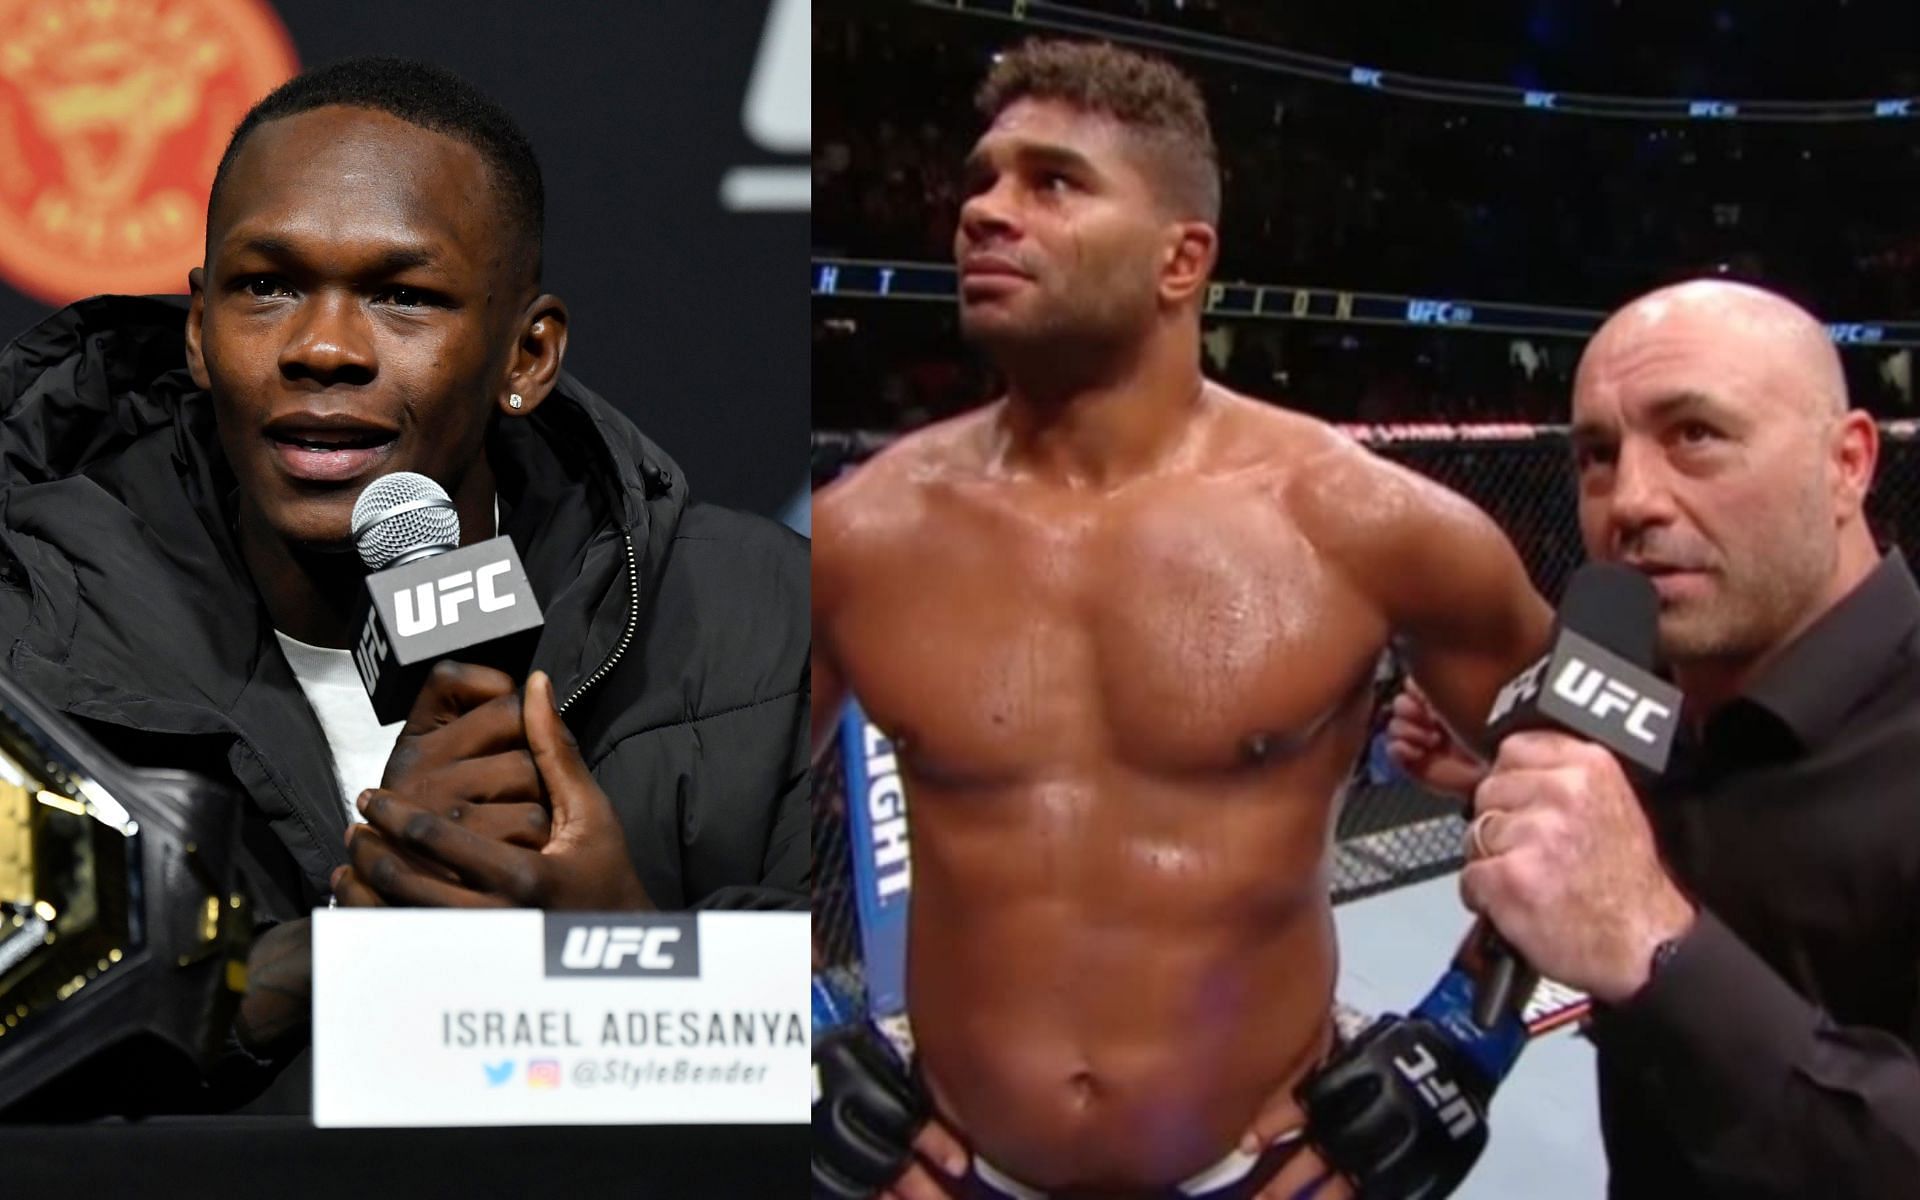 Israel Adesanya (left) and Alistair Overeem with Joe Rogan (right). [via Getty Images and UFC on YouTube]